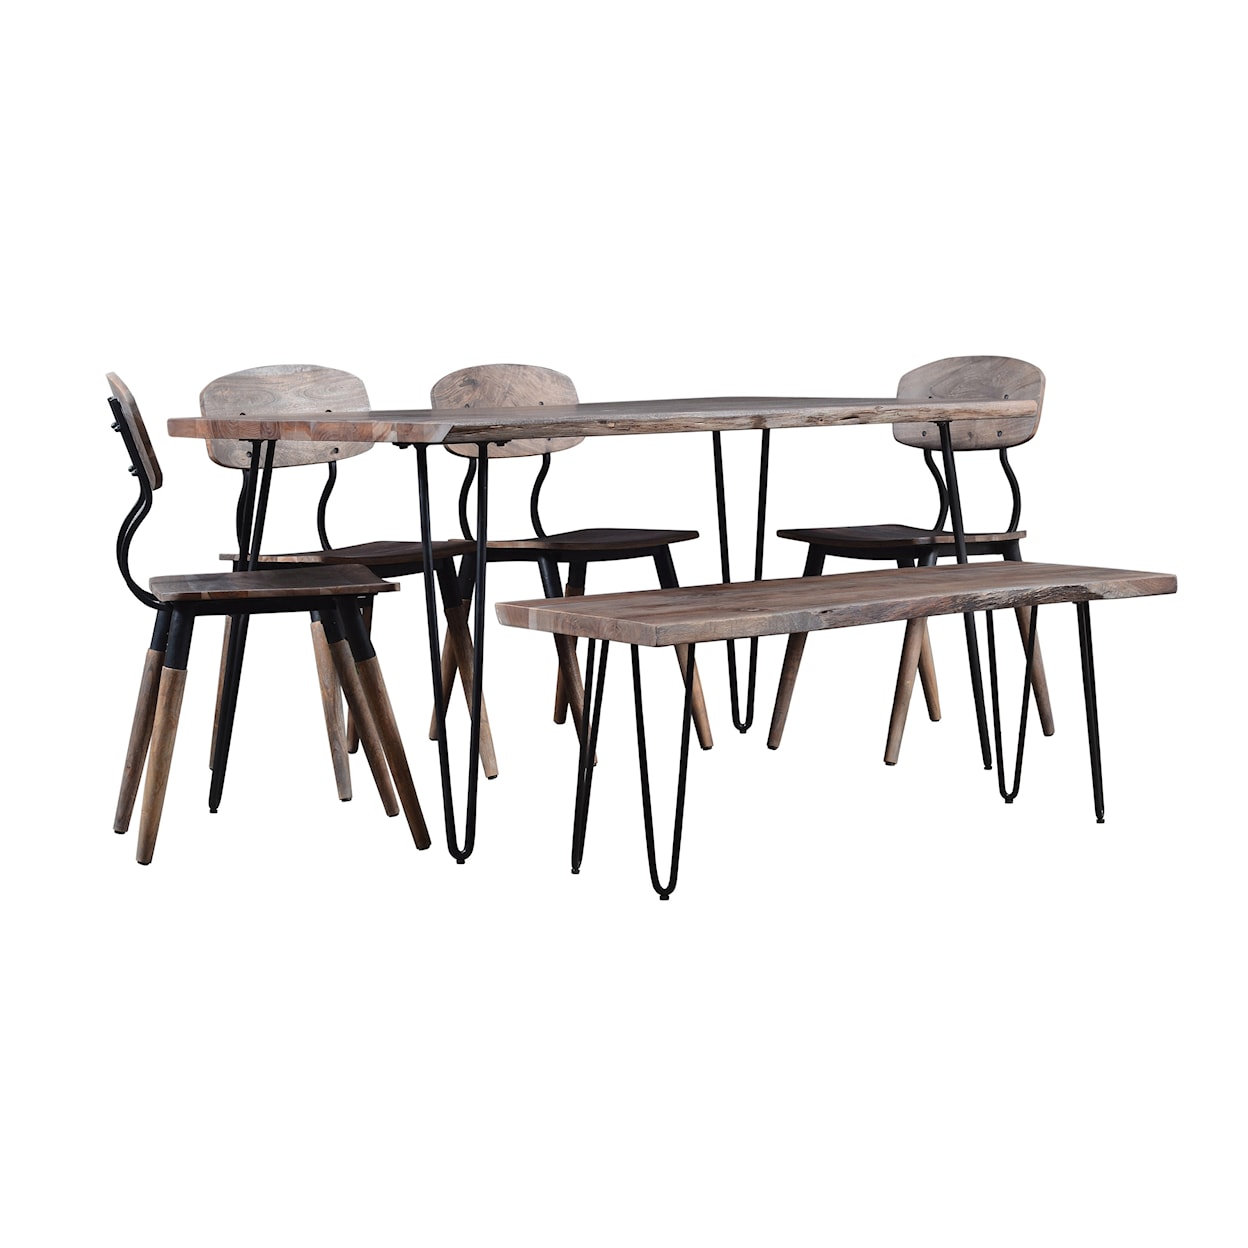 Jofran Nature's Edge 60" Dining Table with 4 Chairs and Bench